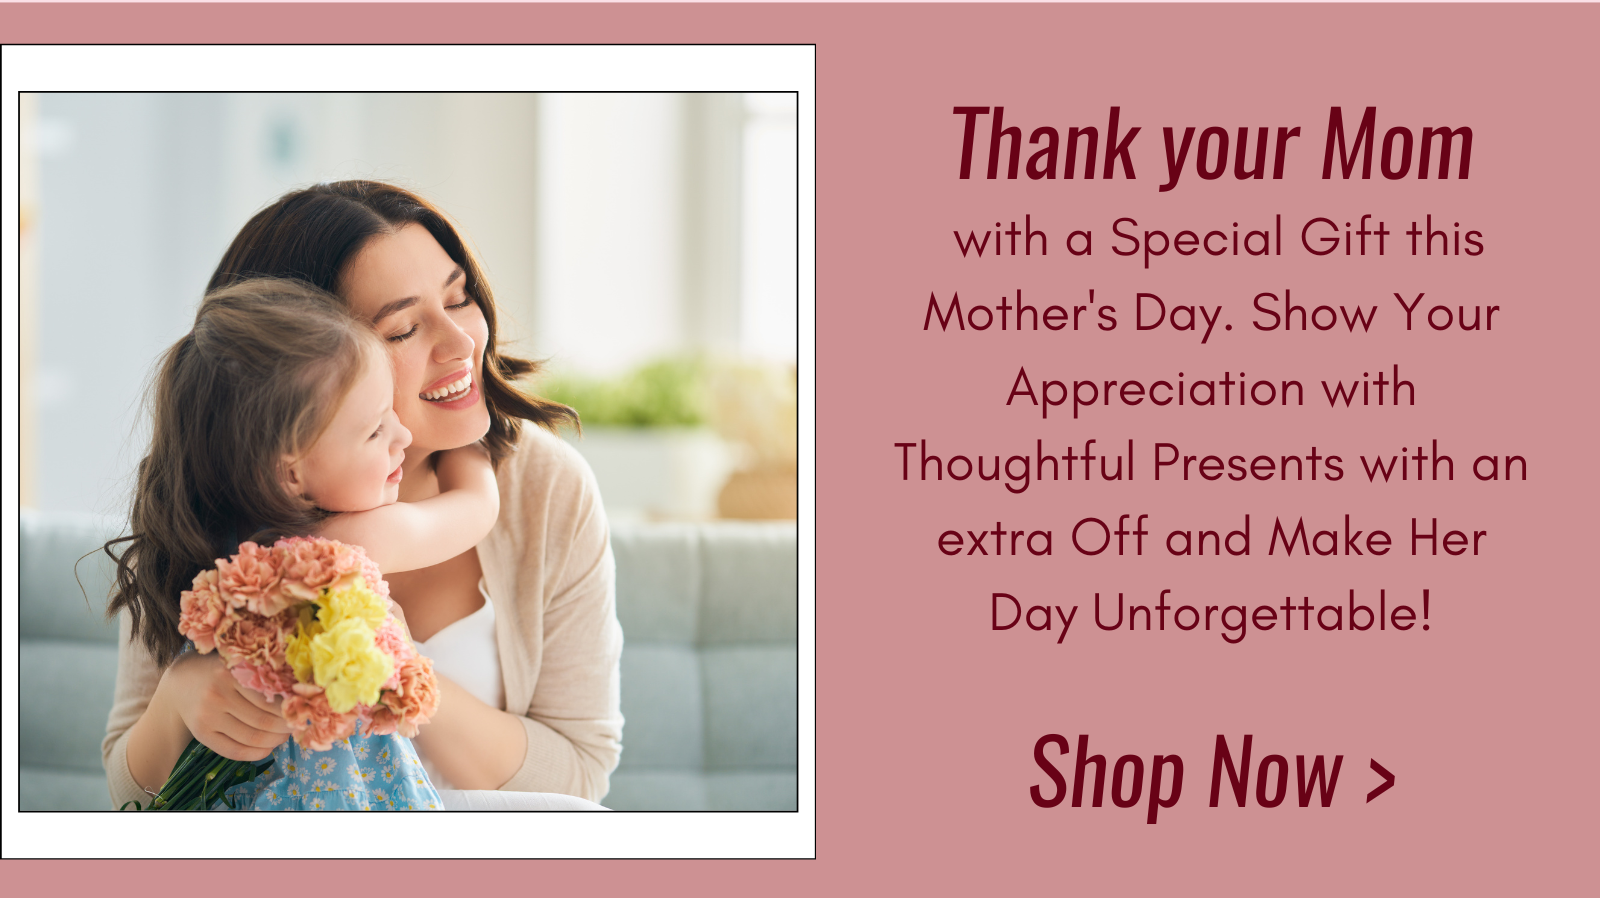 Mother's day Sale